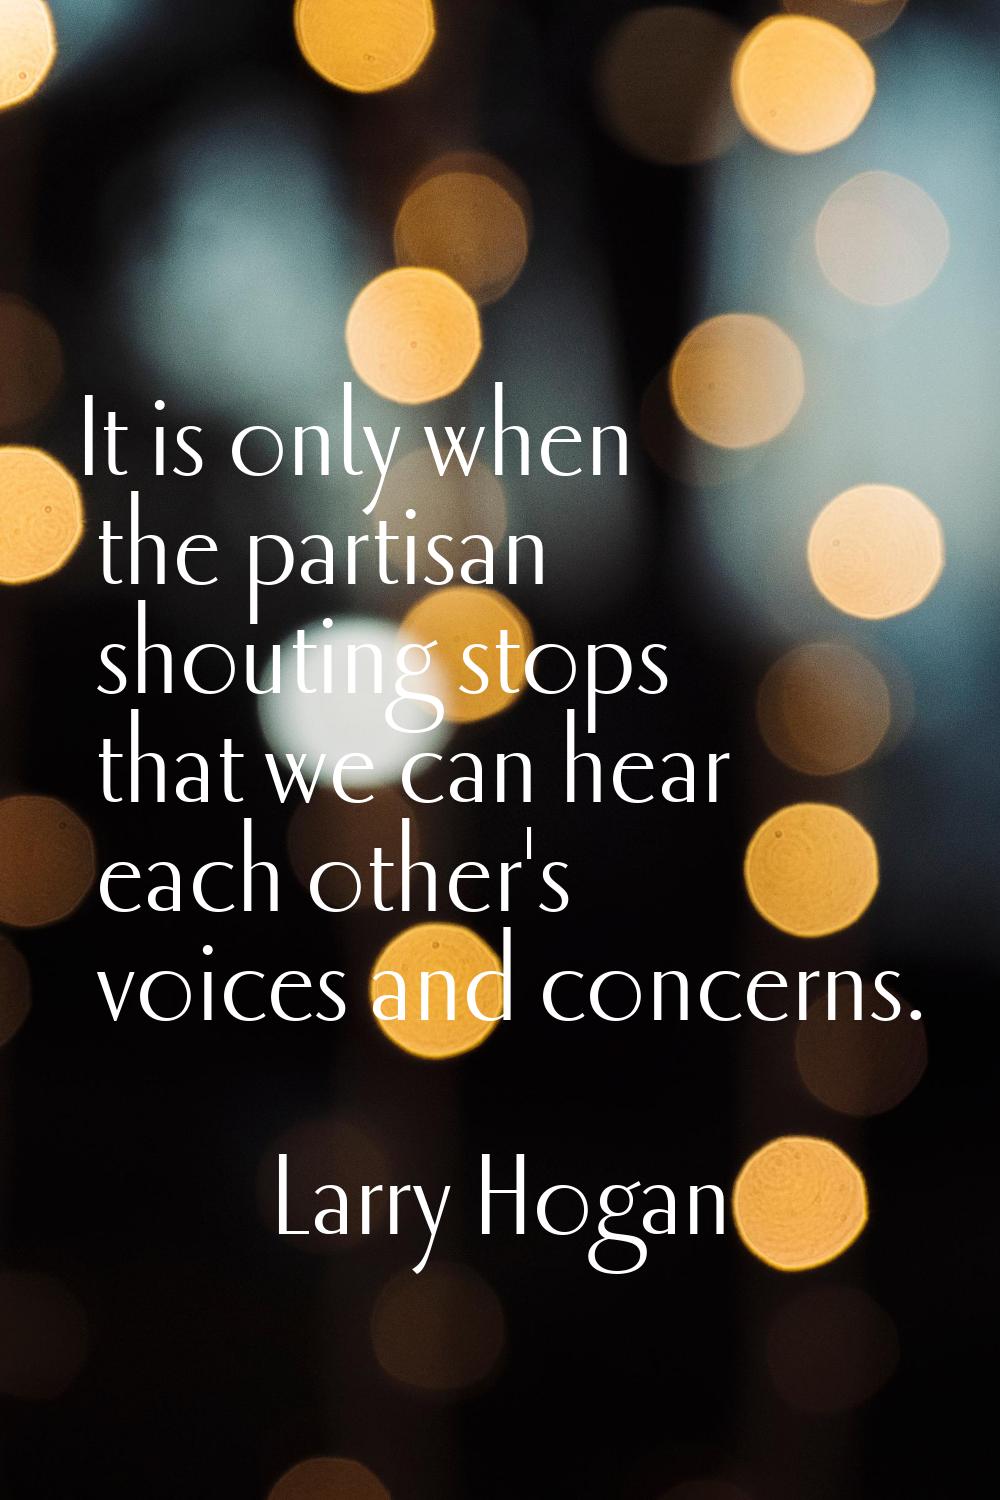 It is only when the partisan shouting stops that we can hear each other's voices and concerns.